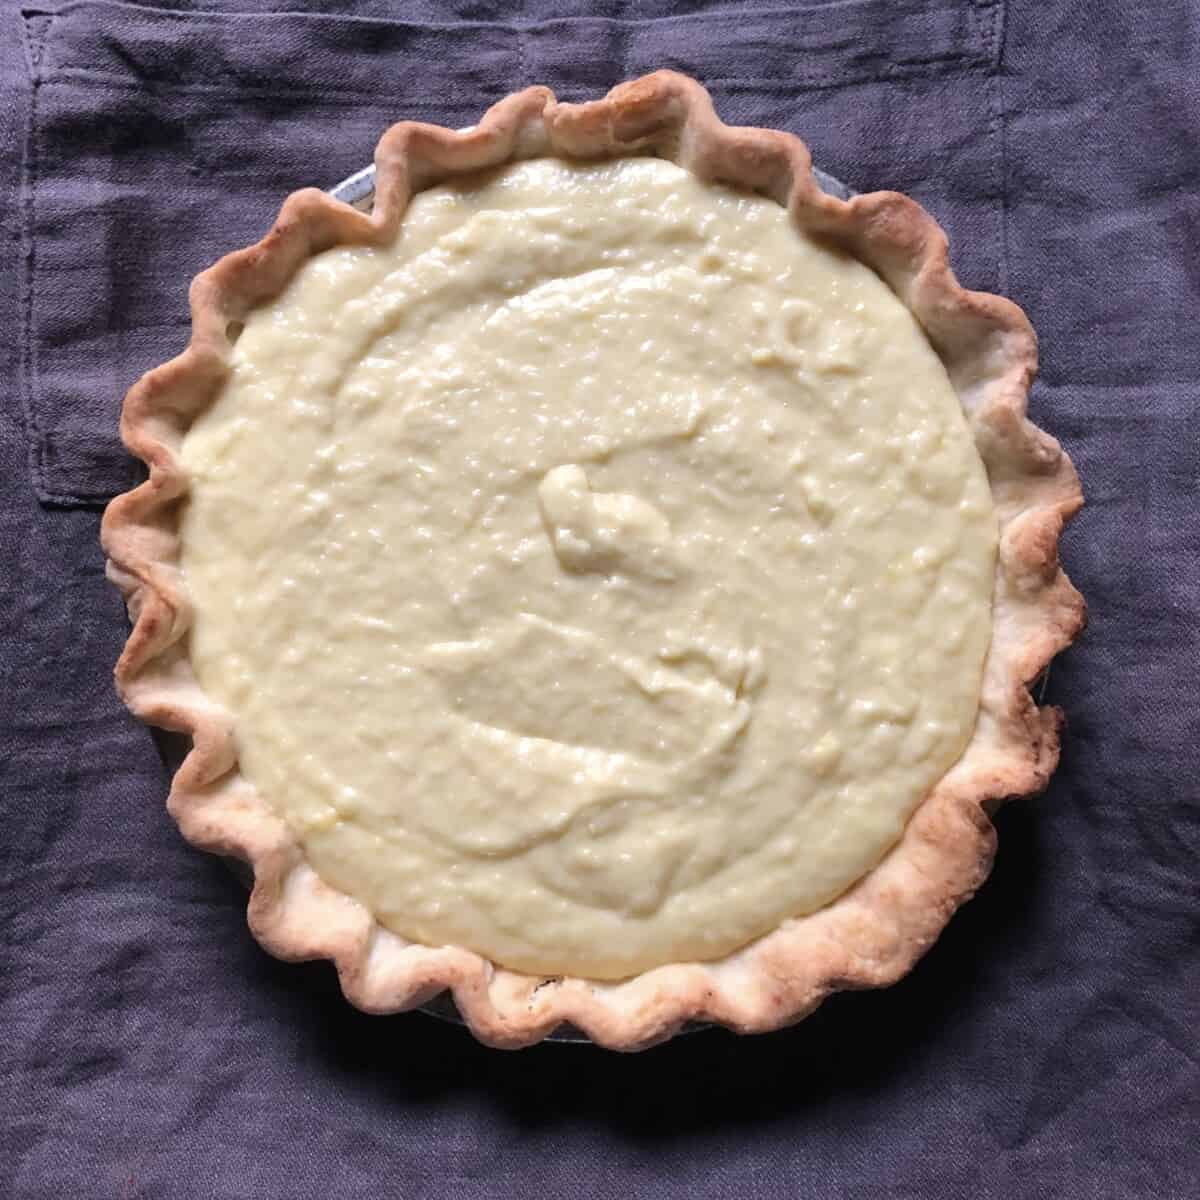 a buttery yellow coconut cream smoothed out in a golden baked pie crust